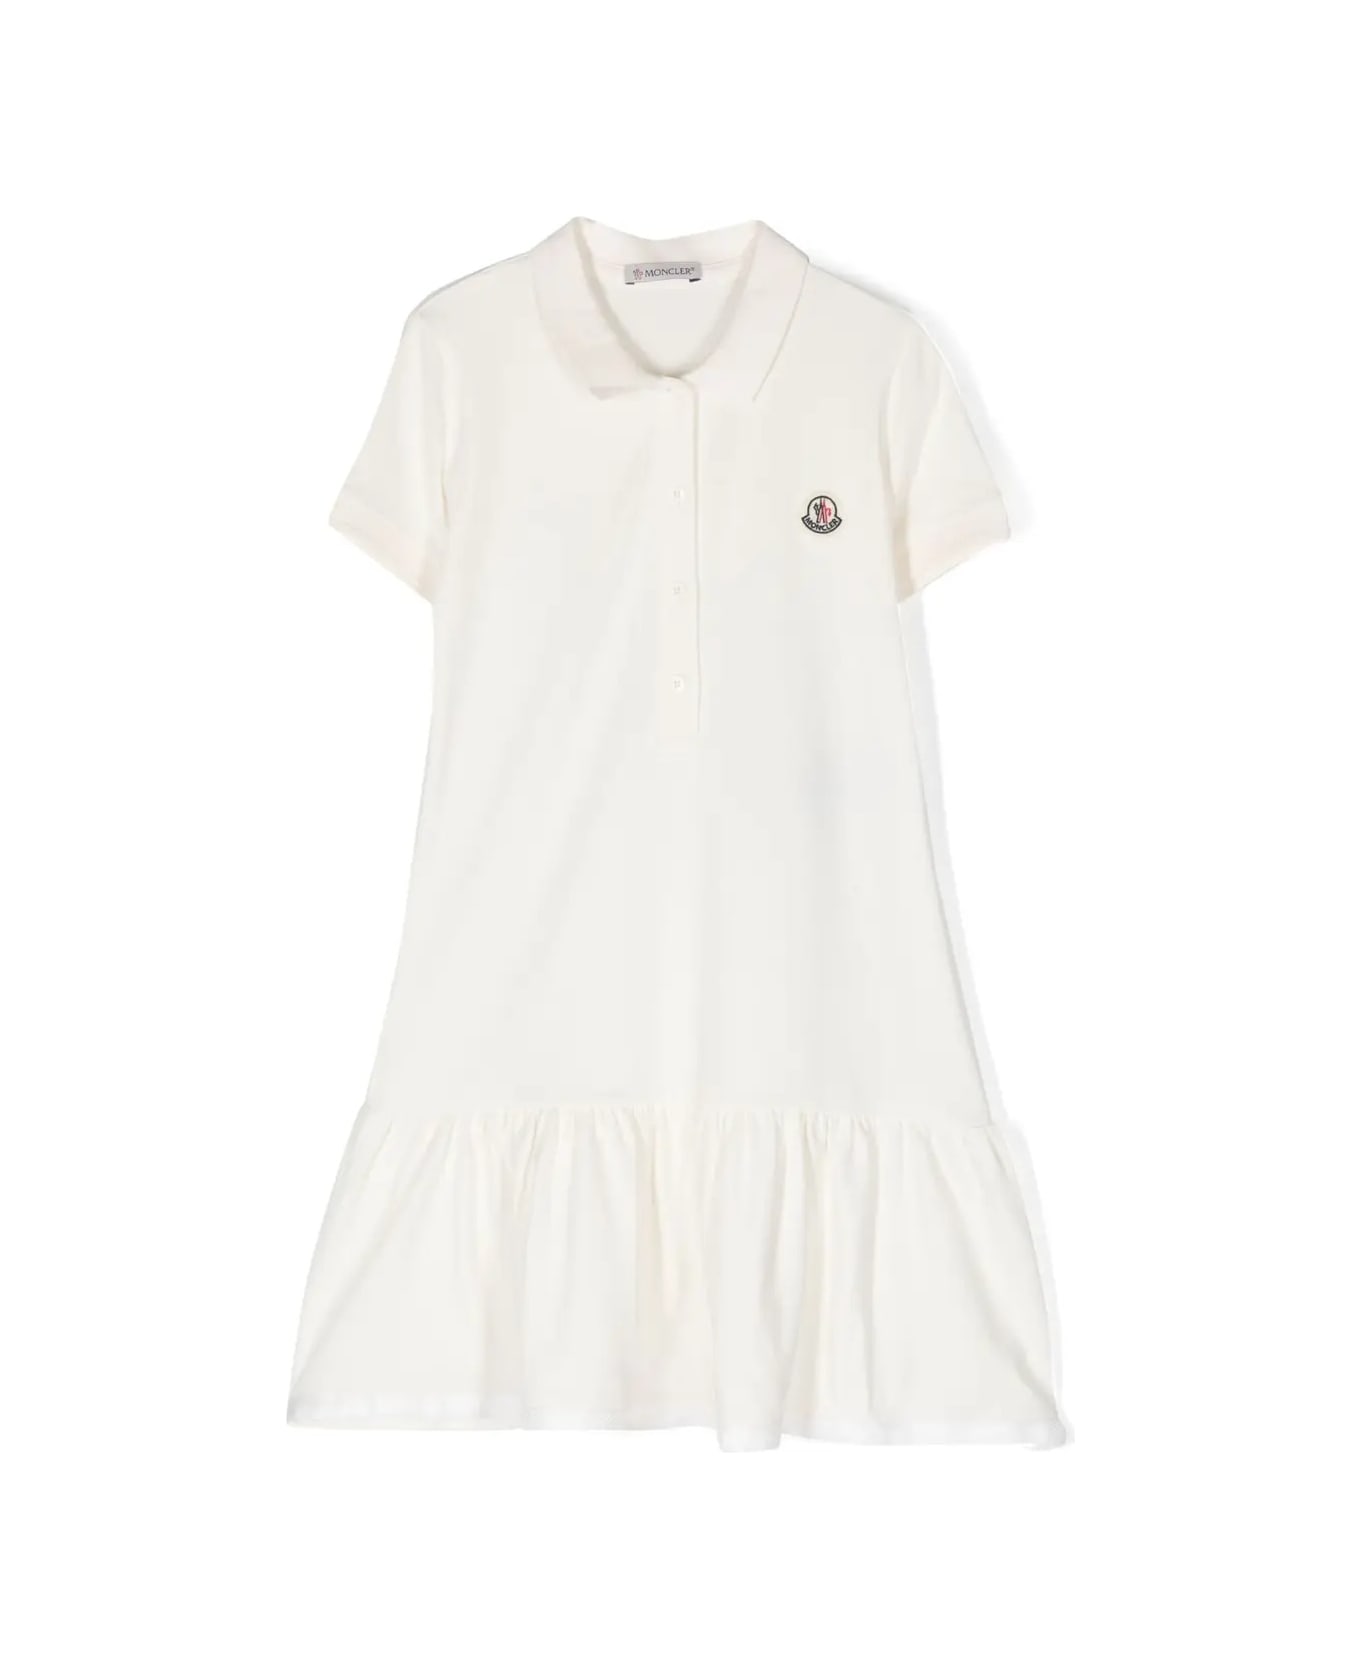 Moncler White Polo Style Dress With Logo Patch - White